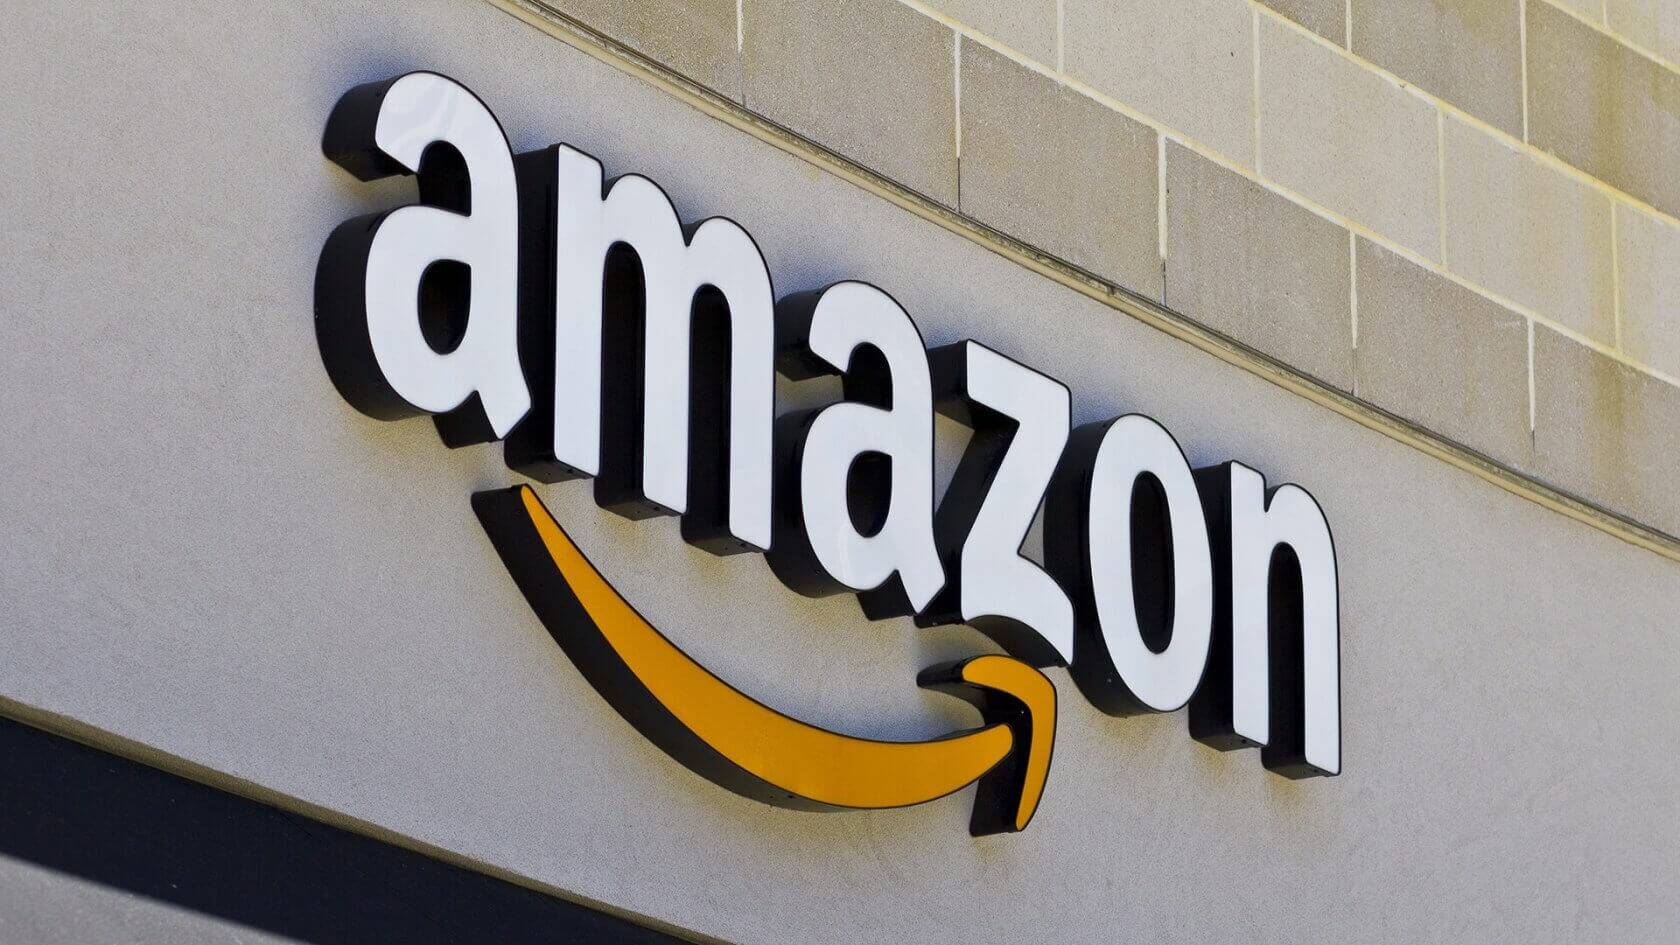 Amazon promises up to two weeks of paid sick leave for workers diagnosed with COVID-19